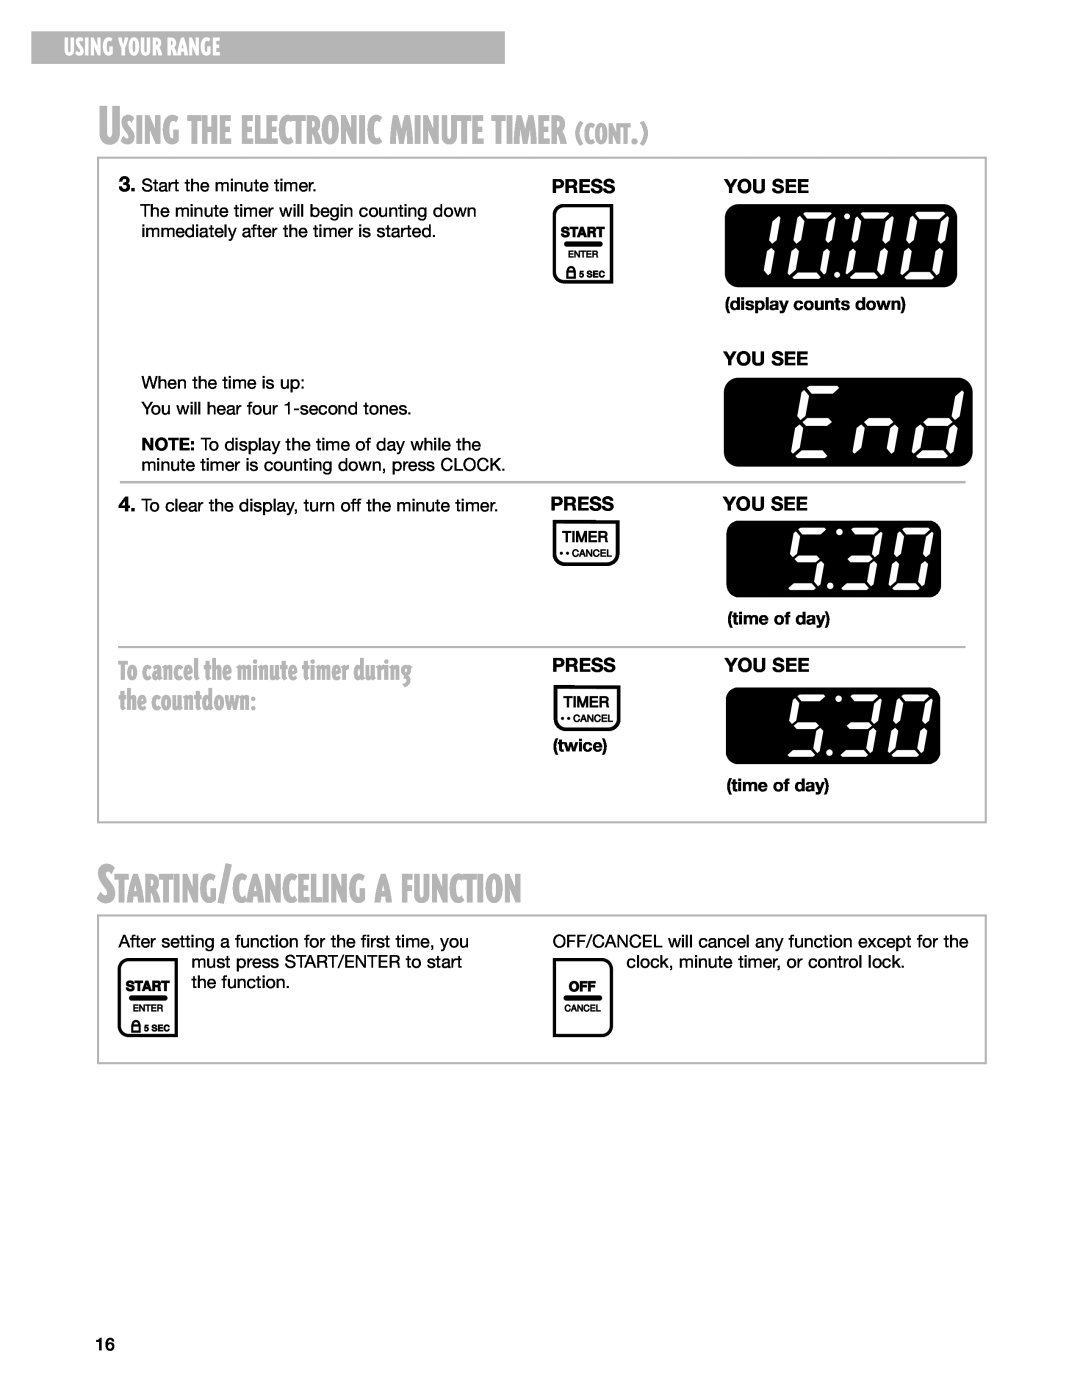 Whirlpool RF315PXG Starting/Canceling A Function, To cancel the minute timer during the countdown, Using Your Range, Press 